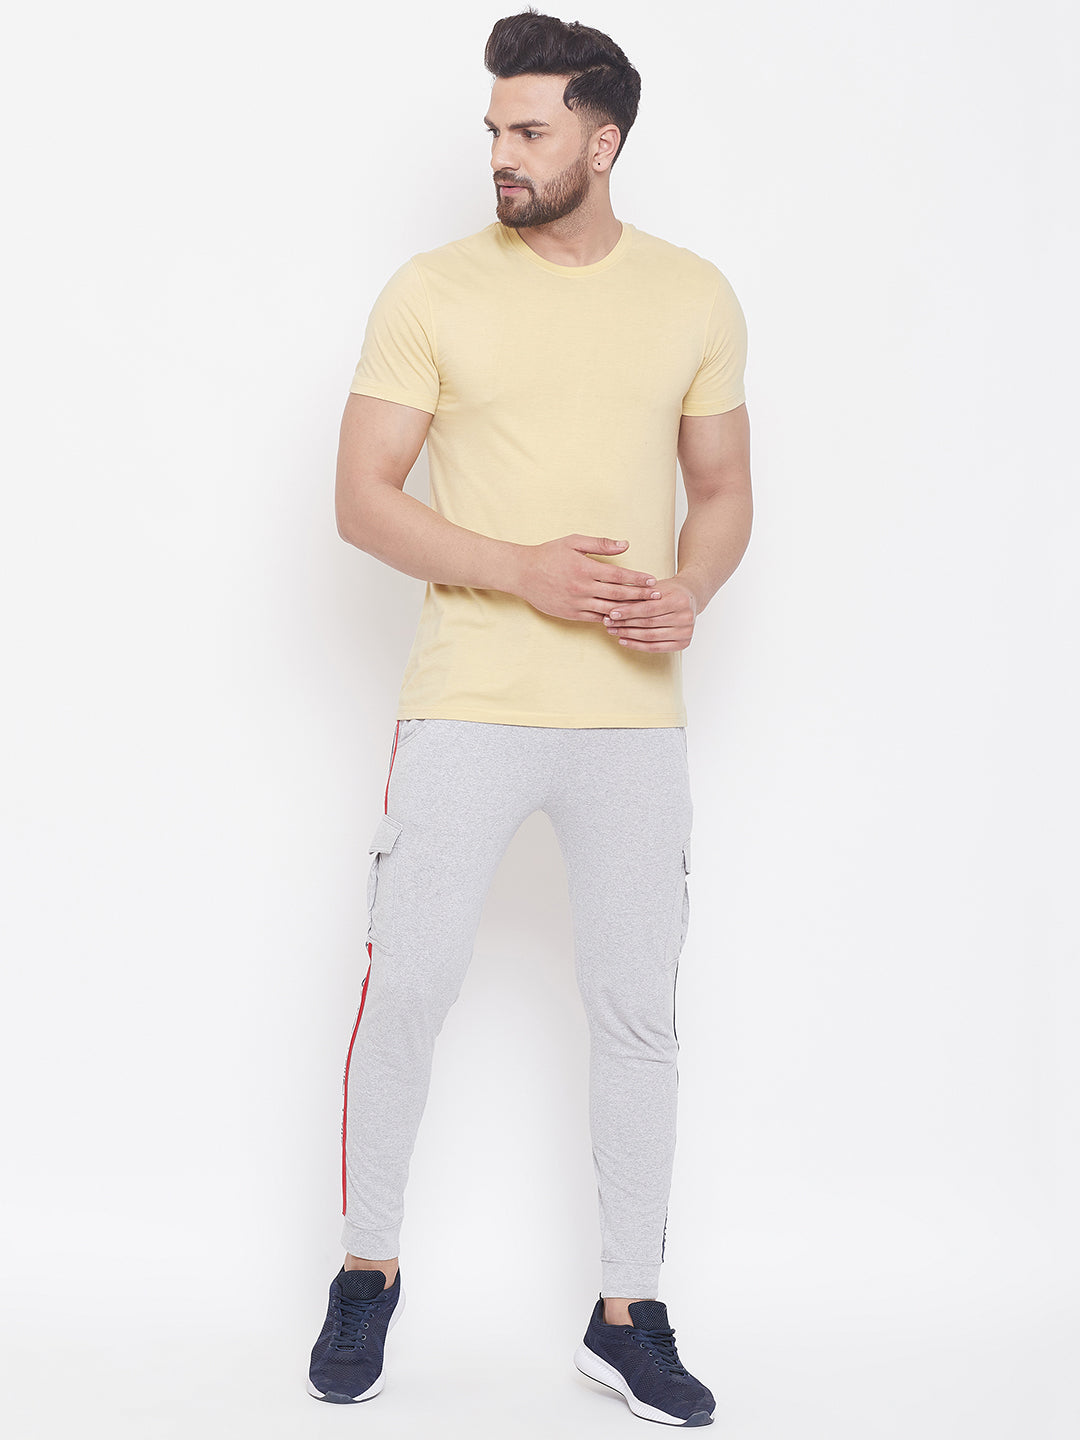 Grey Melange Mid - Rise Slim Fit Joggers With Contrast Taping